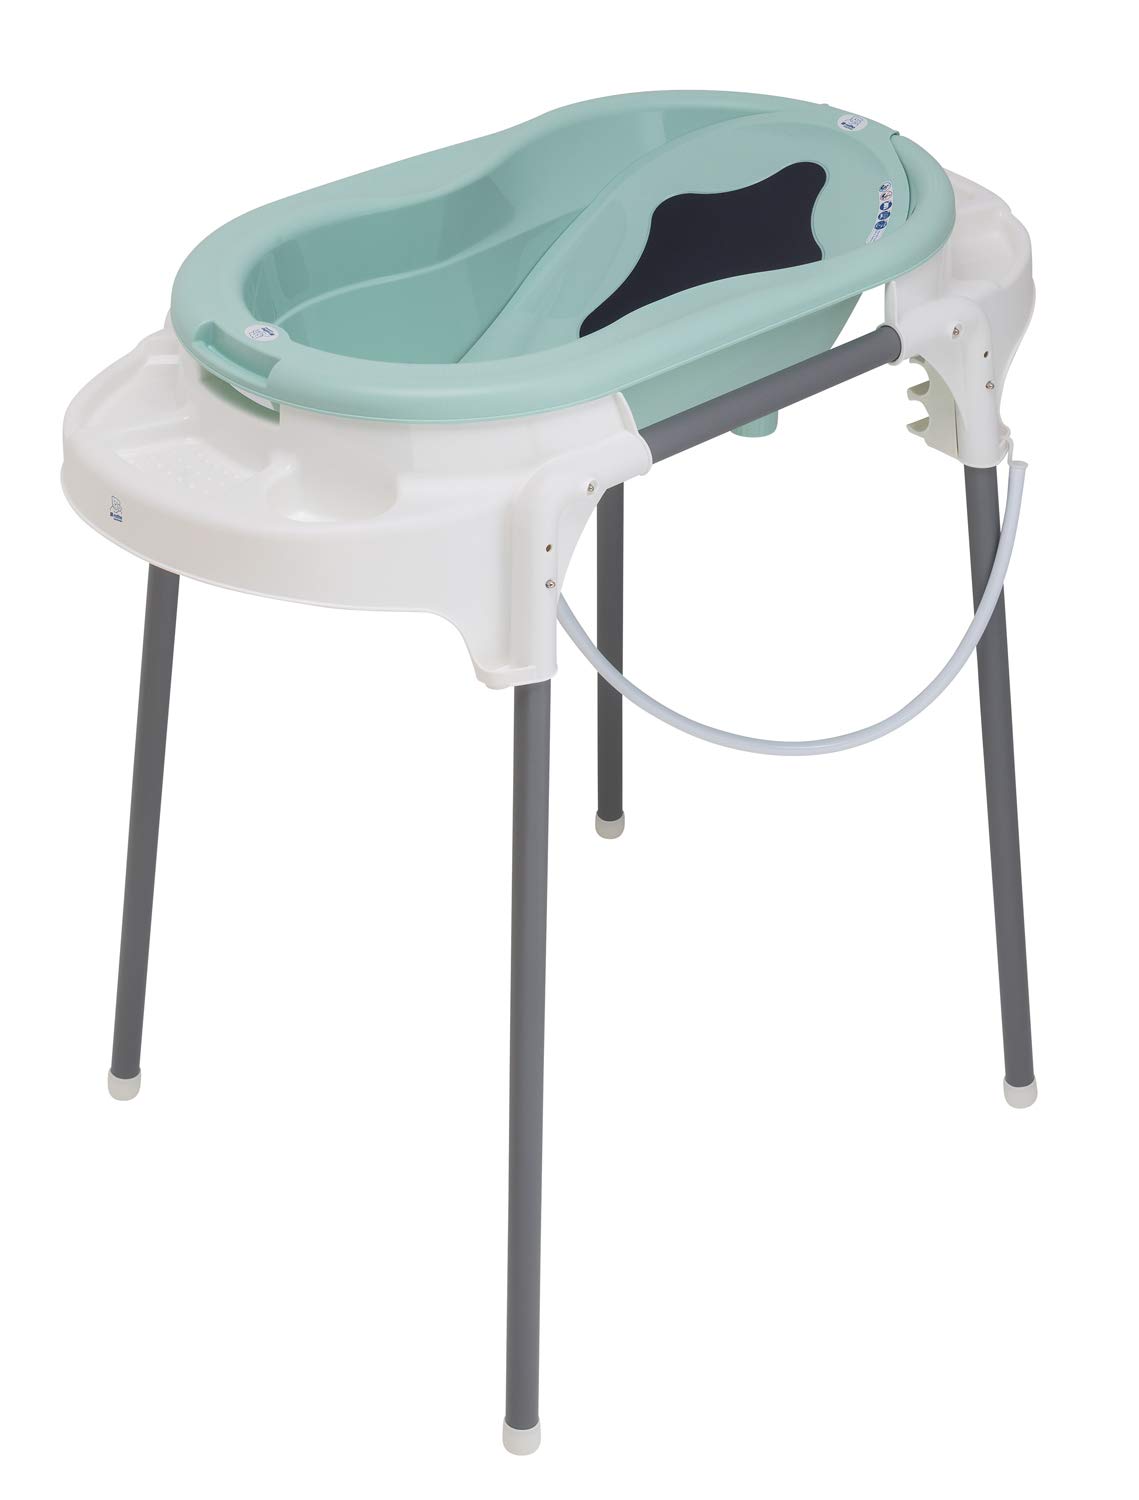 Rotho Babydesign TOP 21042 0266 01 Bath Station with Baby Bath, Bath Stand, Bath Insert and Drain Hose 0-12 Months Green